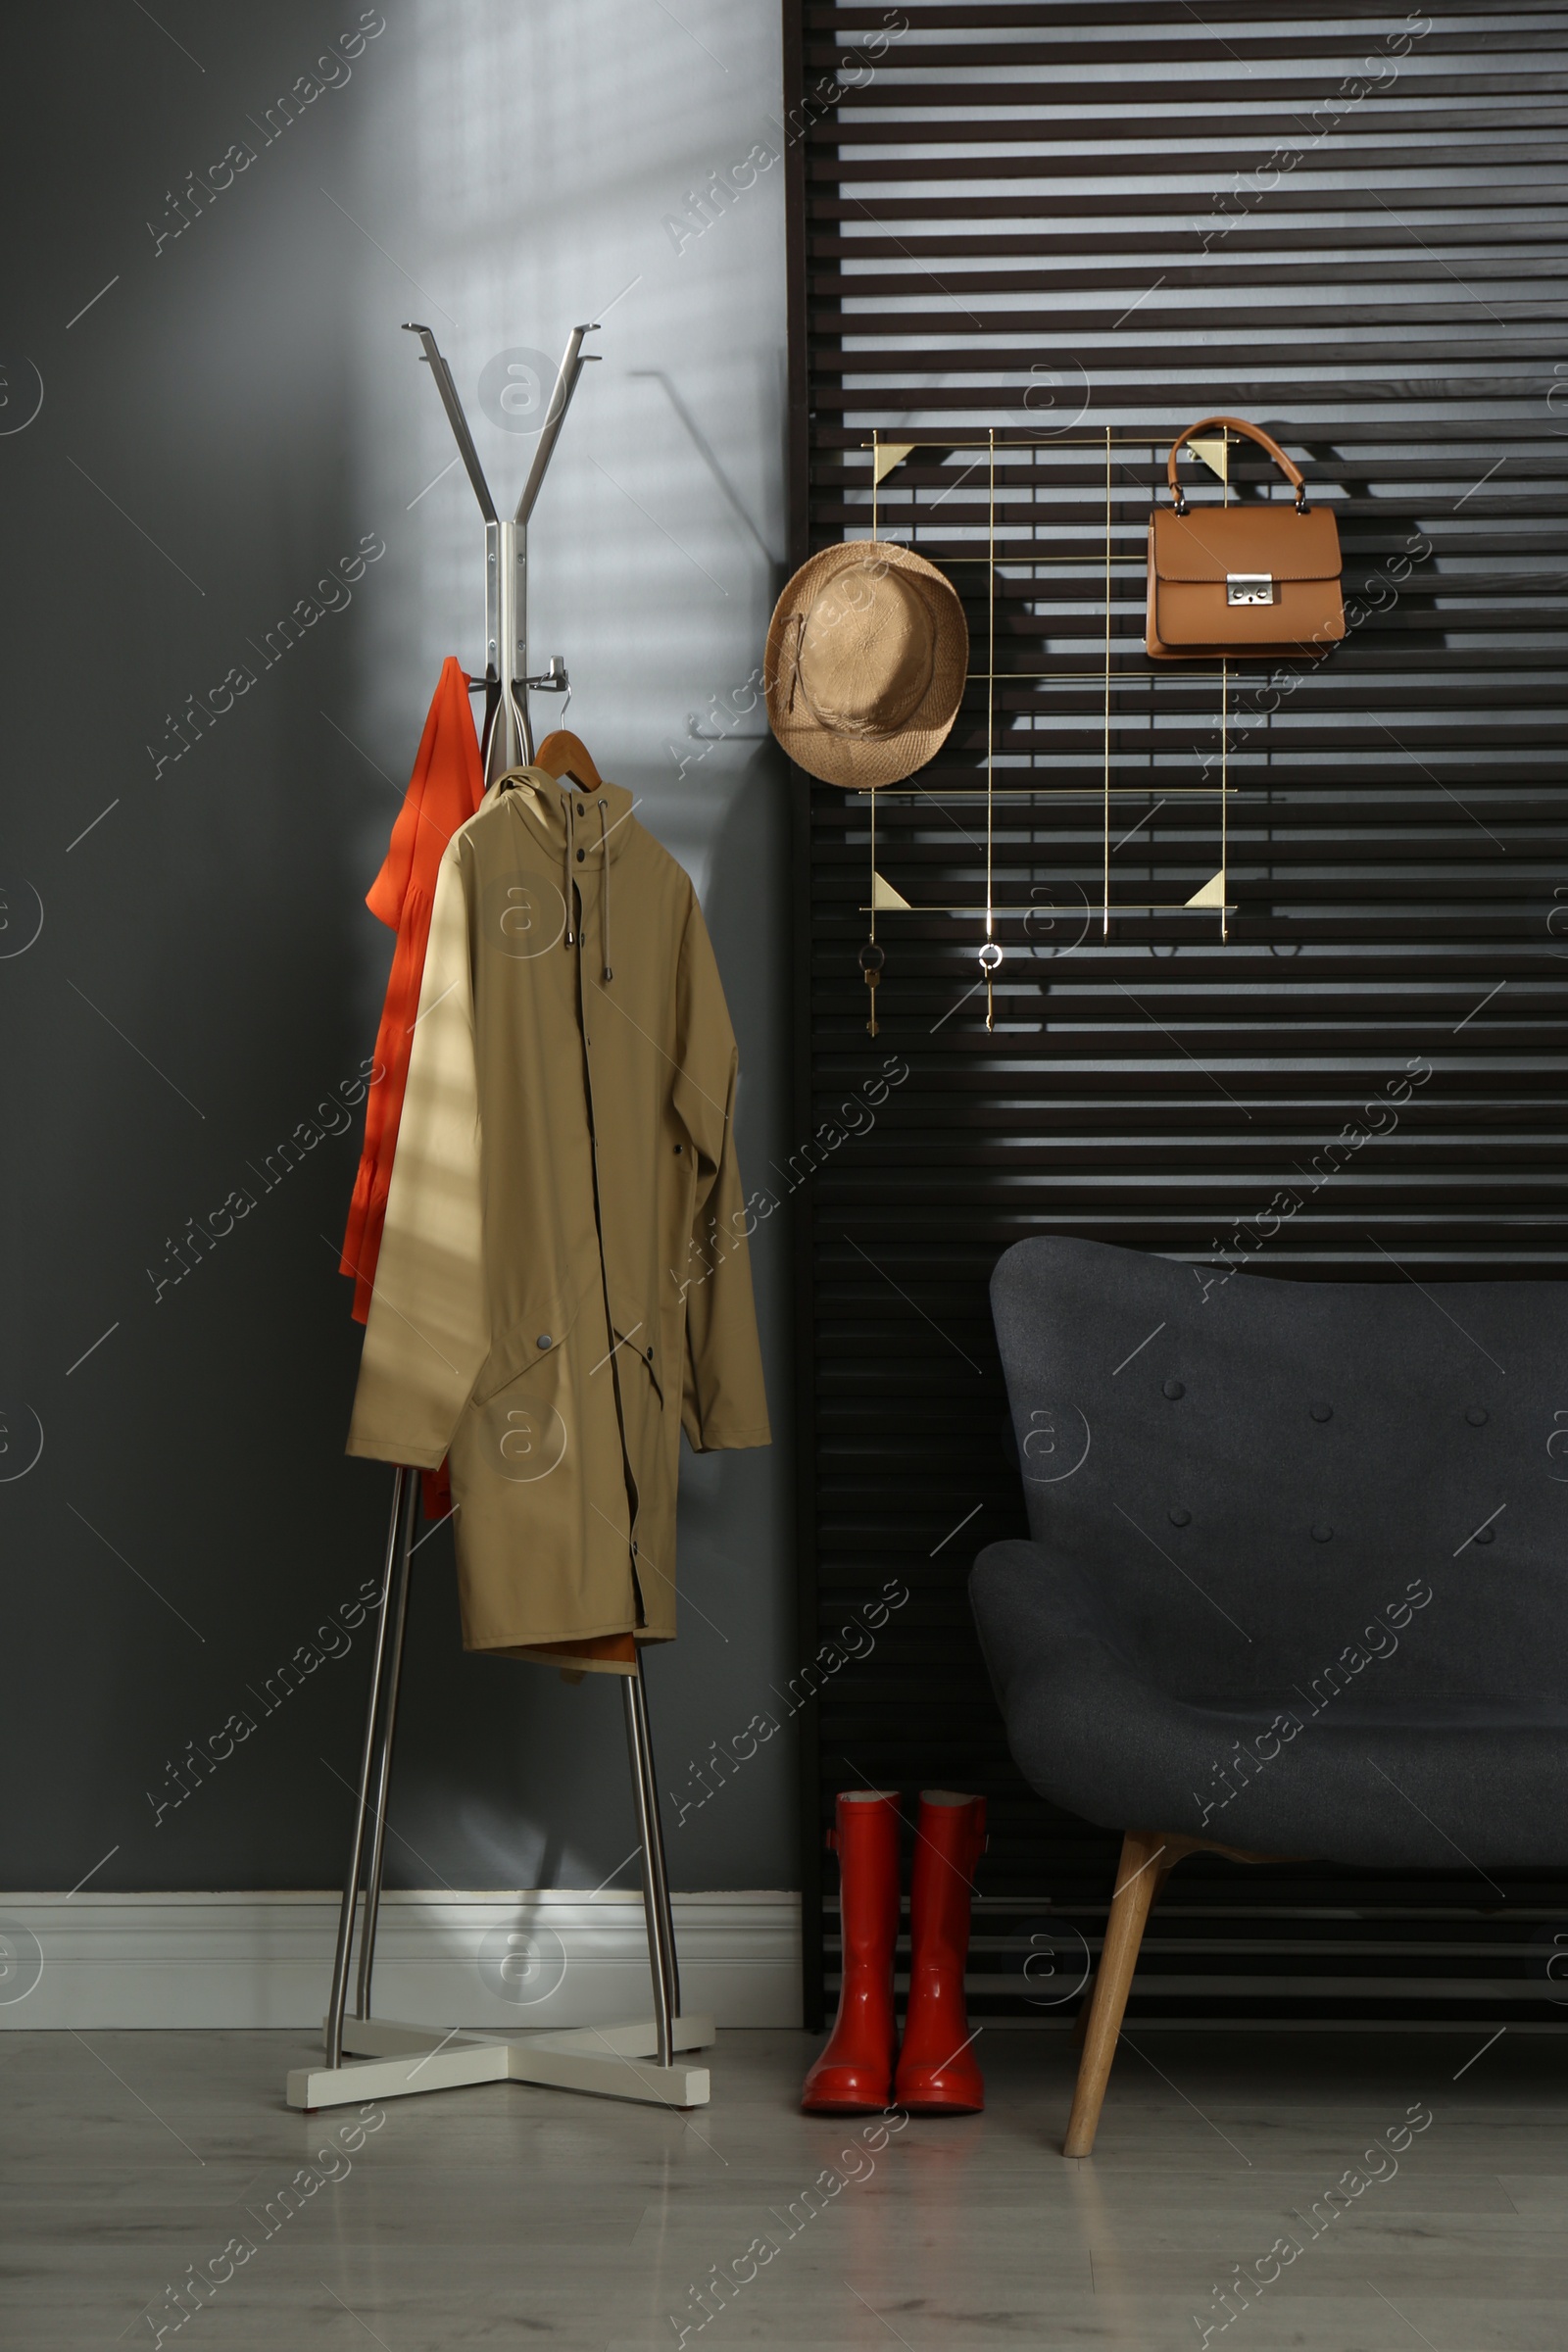 Photo of Hallway interior with sofa, clothes and accessories